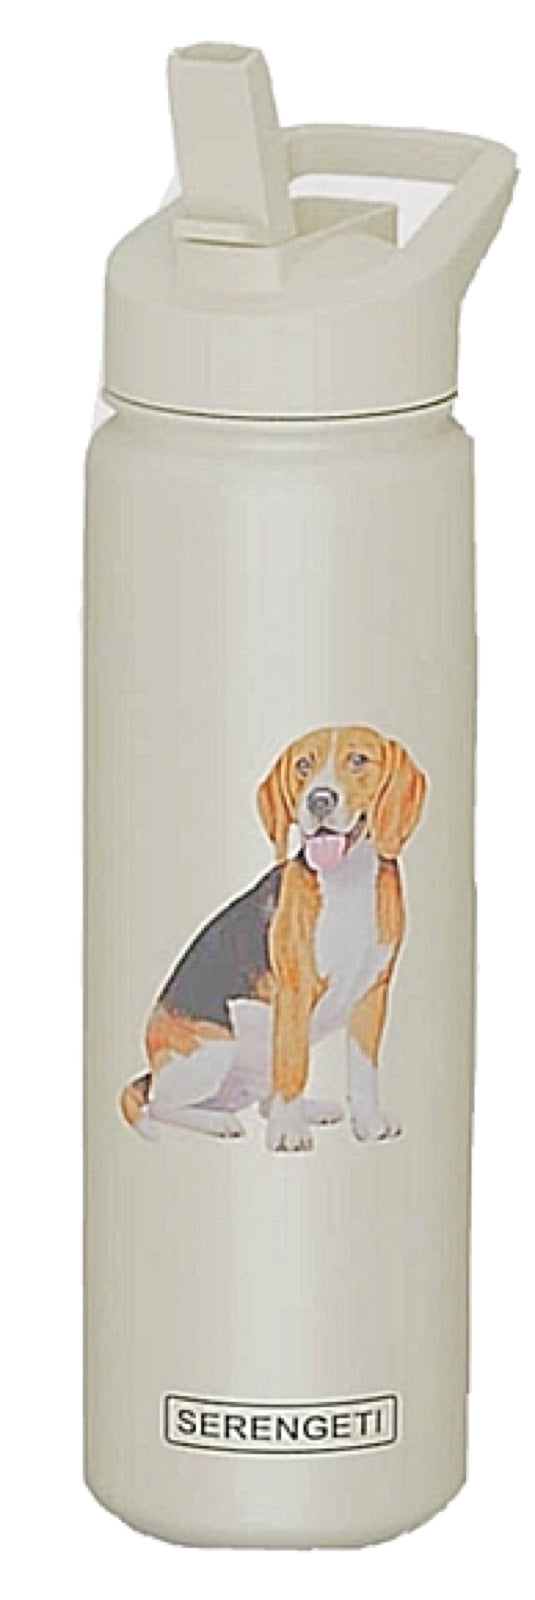 BEAGLE Dog Stainless Steel 24 Oz. Water Bottle SERENGETI Brand By E&S PETS